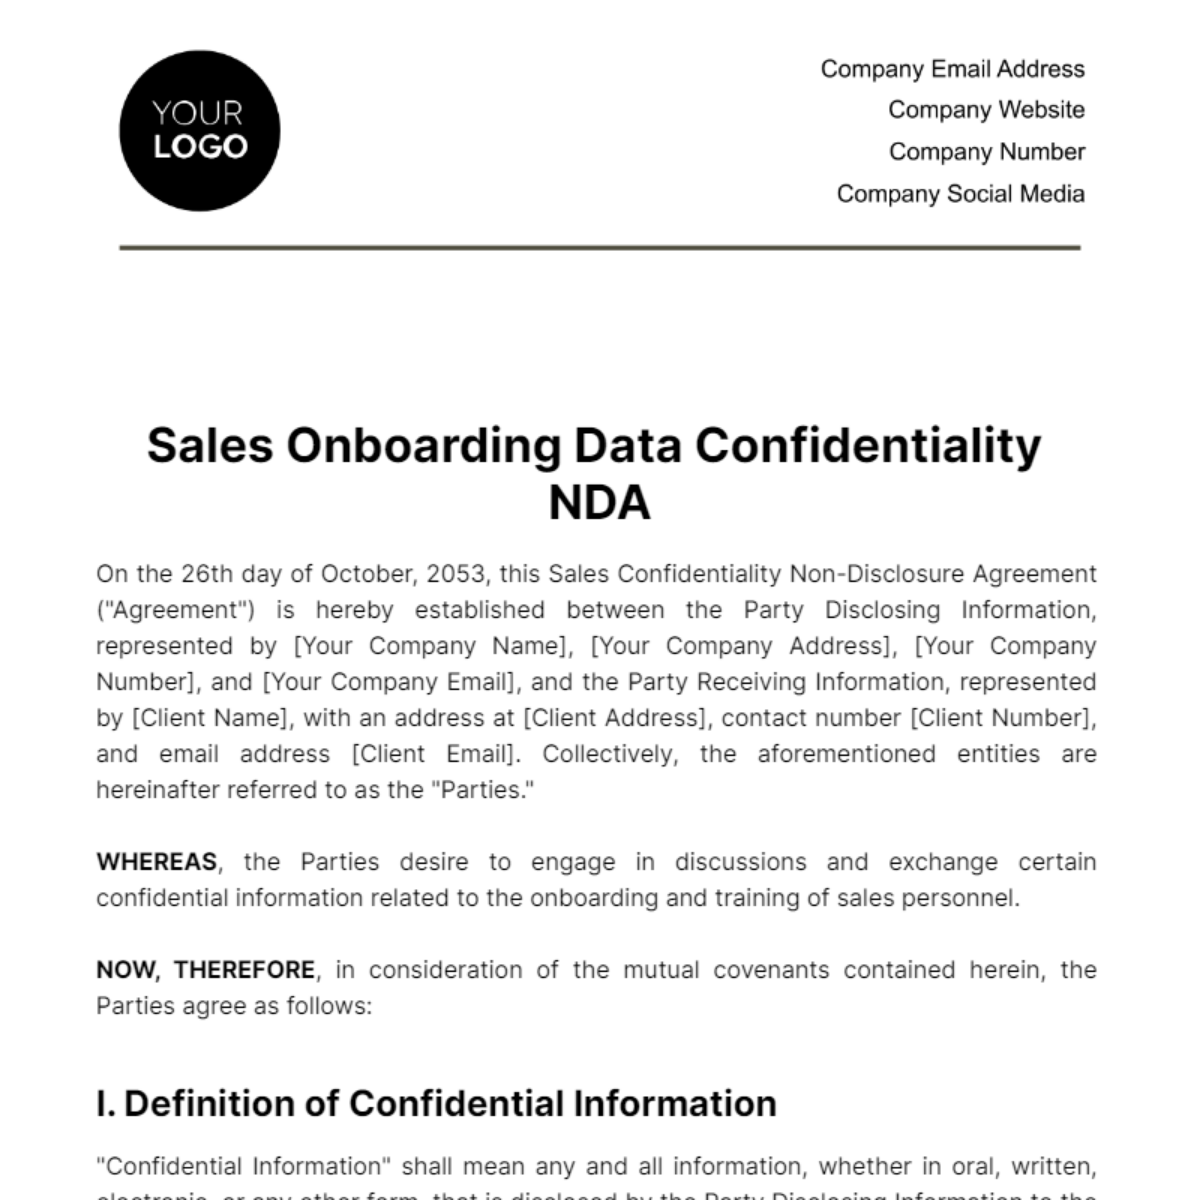 Free Sales Onboarding Data Confidentiality NDA Template